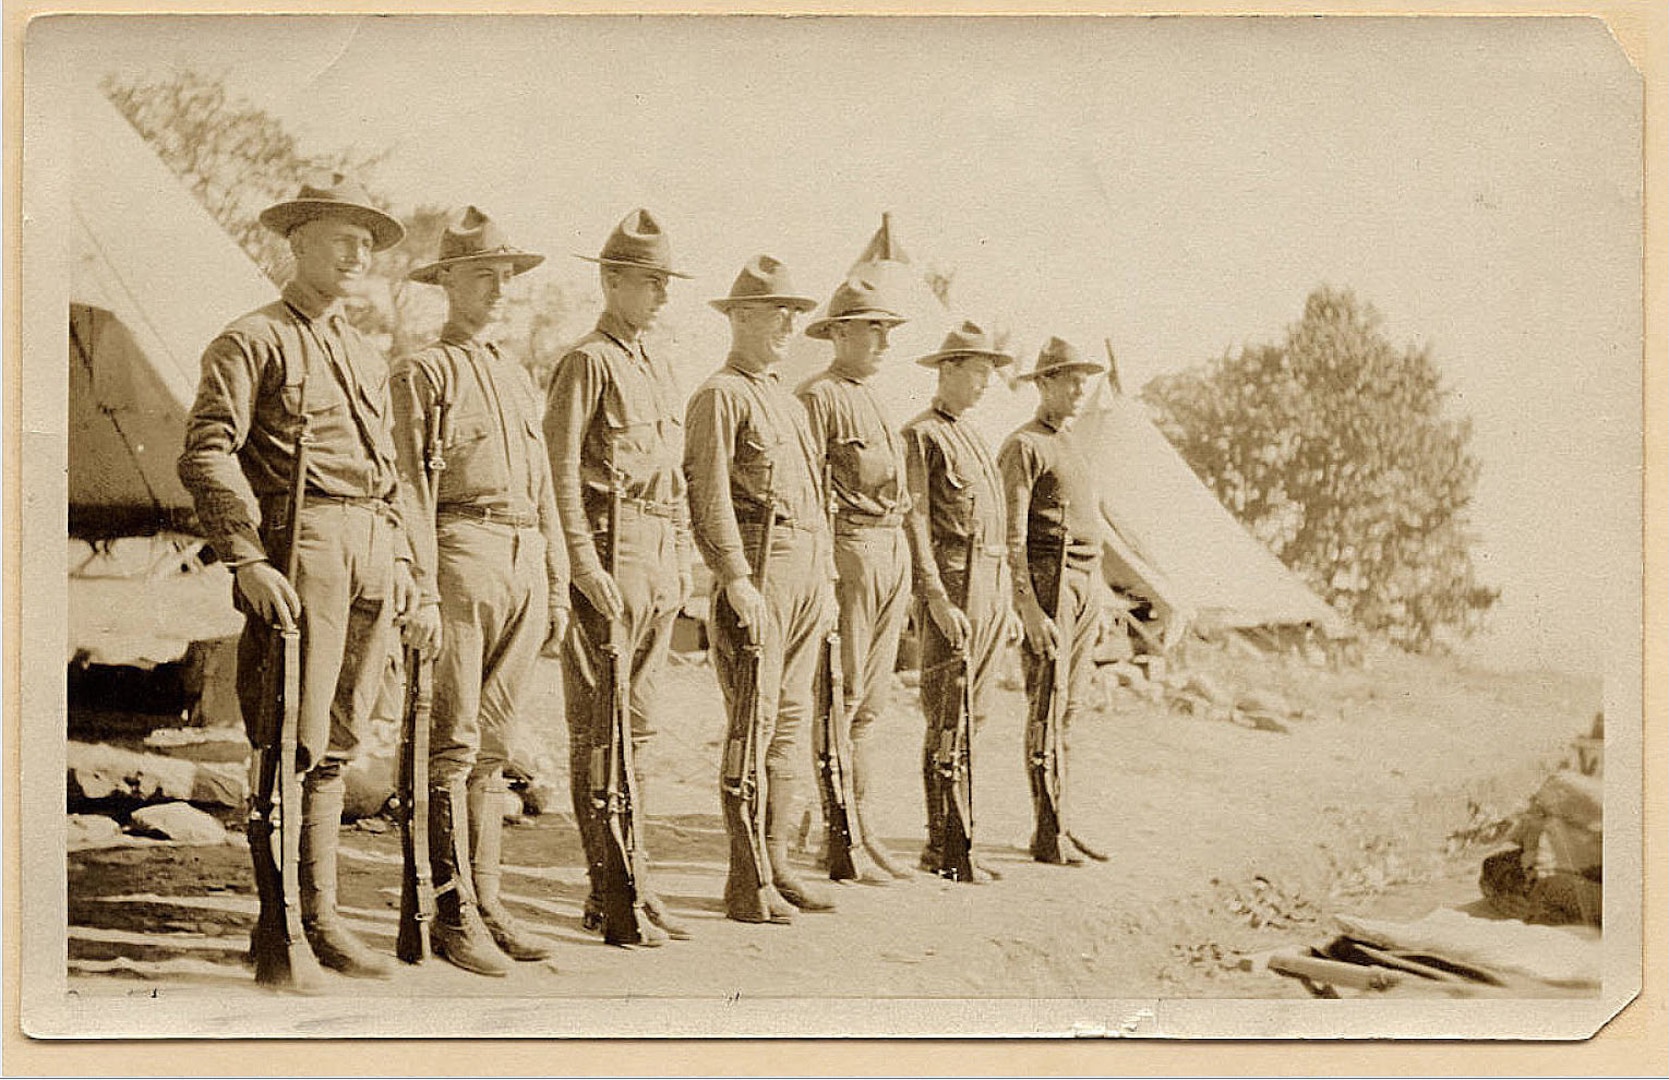 New York Guard members identified as  Jake, Jim, Garry, Dick,Tom, Bill, and Hill mount Guard near New Paltz, N.Y., sometime during 1918 in this photograph taken by Thomas F. Burke, a member of the New York Guard, the force which replaced the New York National Guard during World War I. The men guarded the 95-mile lone water line which carried water to New York City from Catskill Mountain reservoirs to protect it against German sabatoge. 